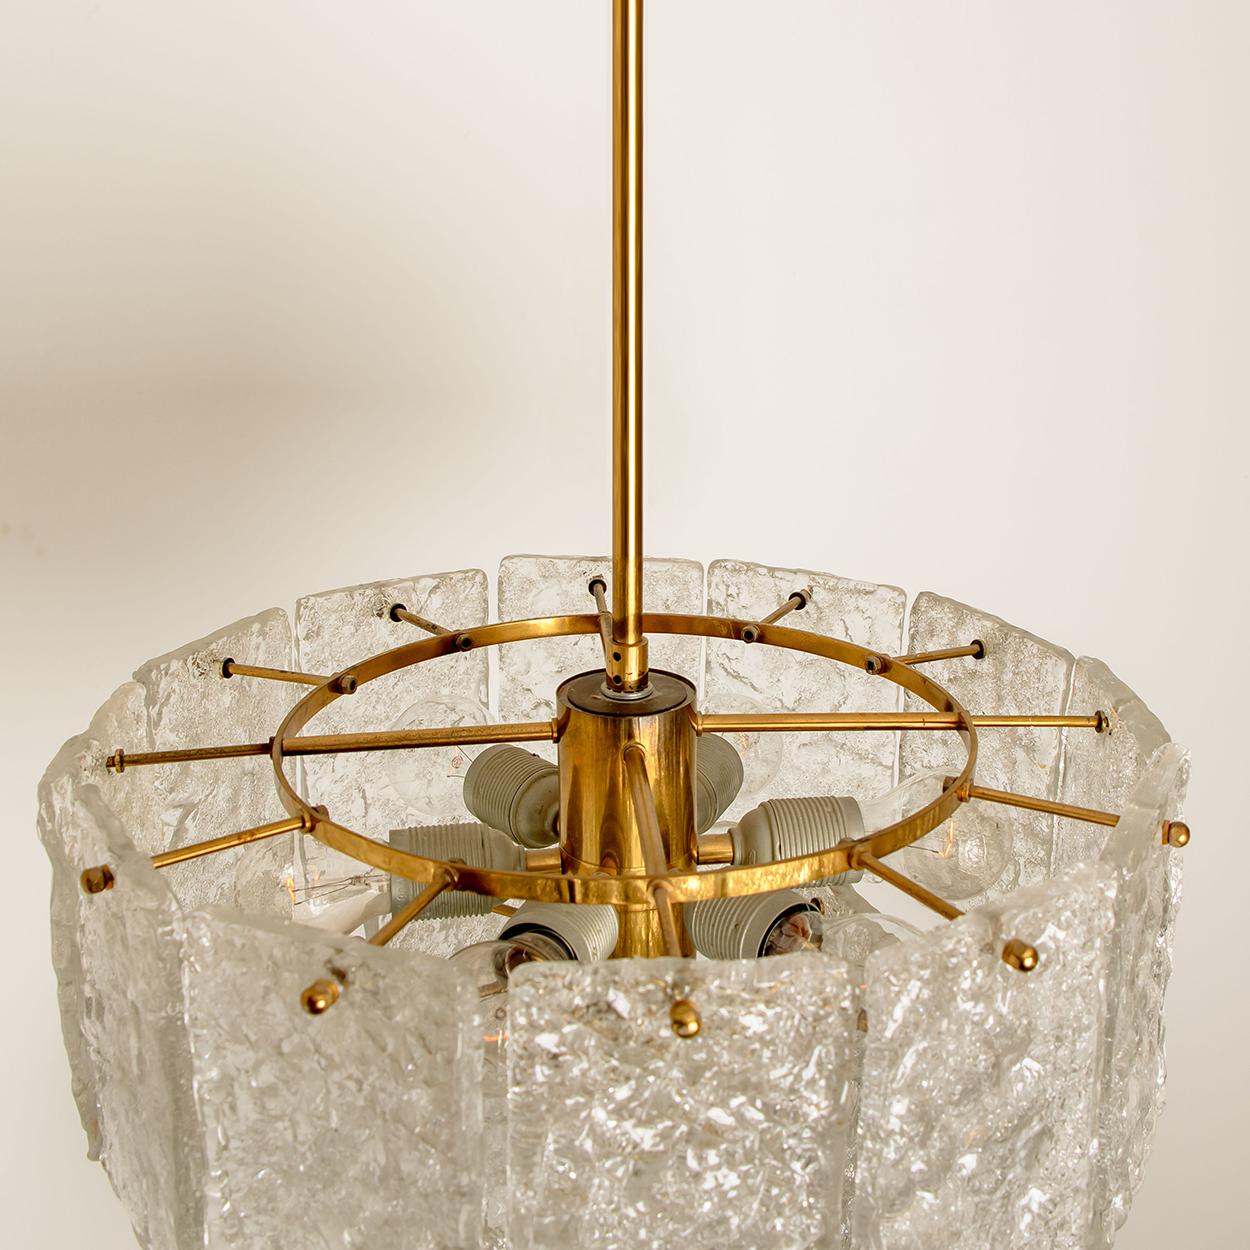 1 of the 2 of Glass and Brass Two Tiers Light Fixtures from Hillebrand, 1960s For Sale 2